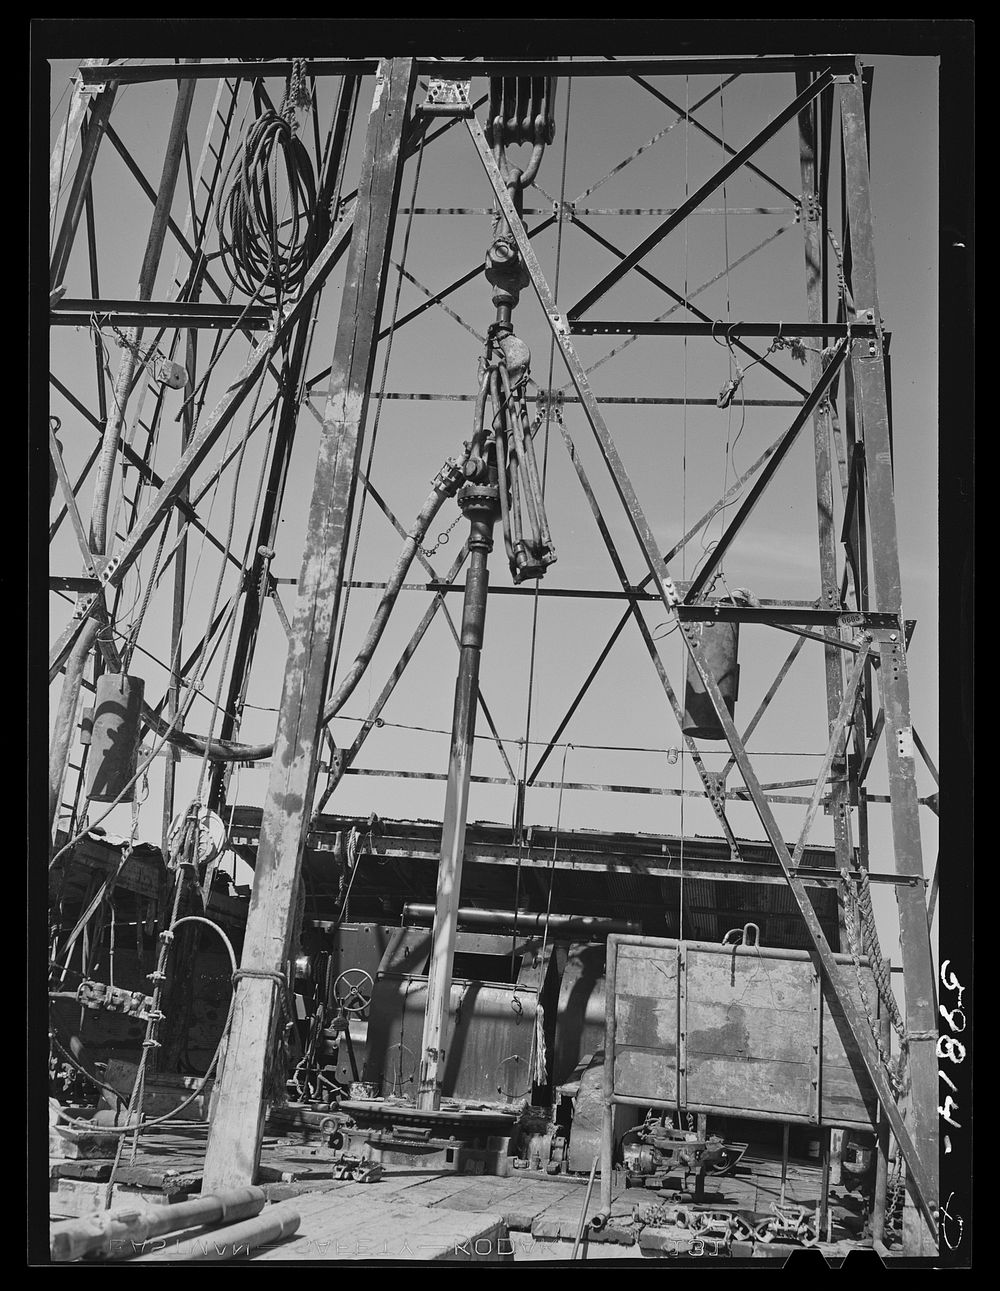 [Untitled photo, possibly related to: Preparing to drill an oil well in Goodrich field of Continental oil company. Valley…